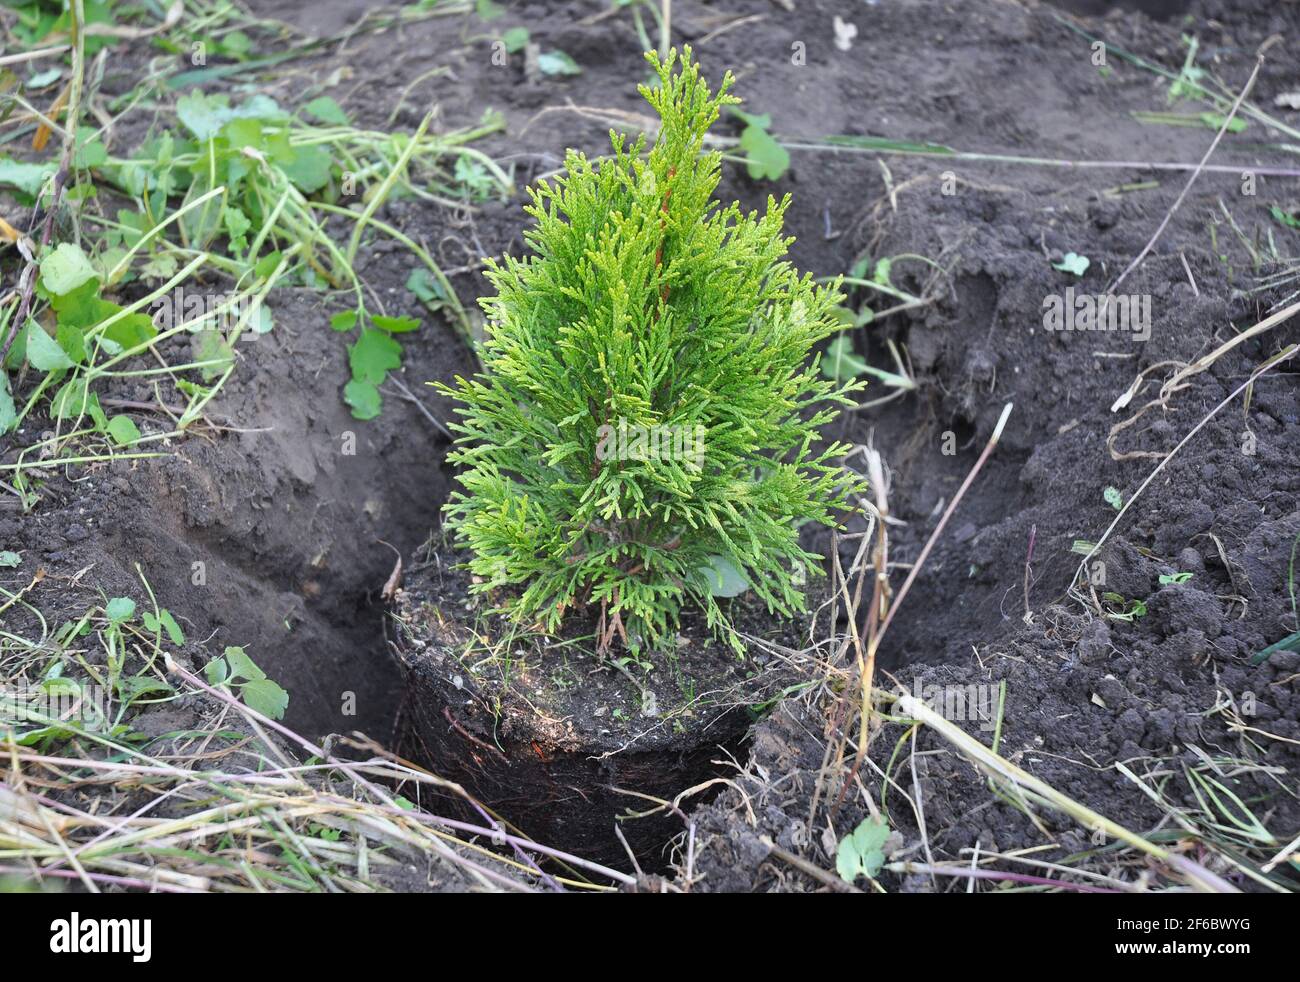 Thuja Sapling with Roots (Thuja Occidentalis Golden Brabant). Planting Cypress. Stock Photo